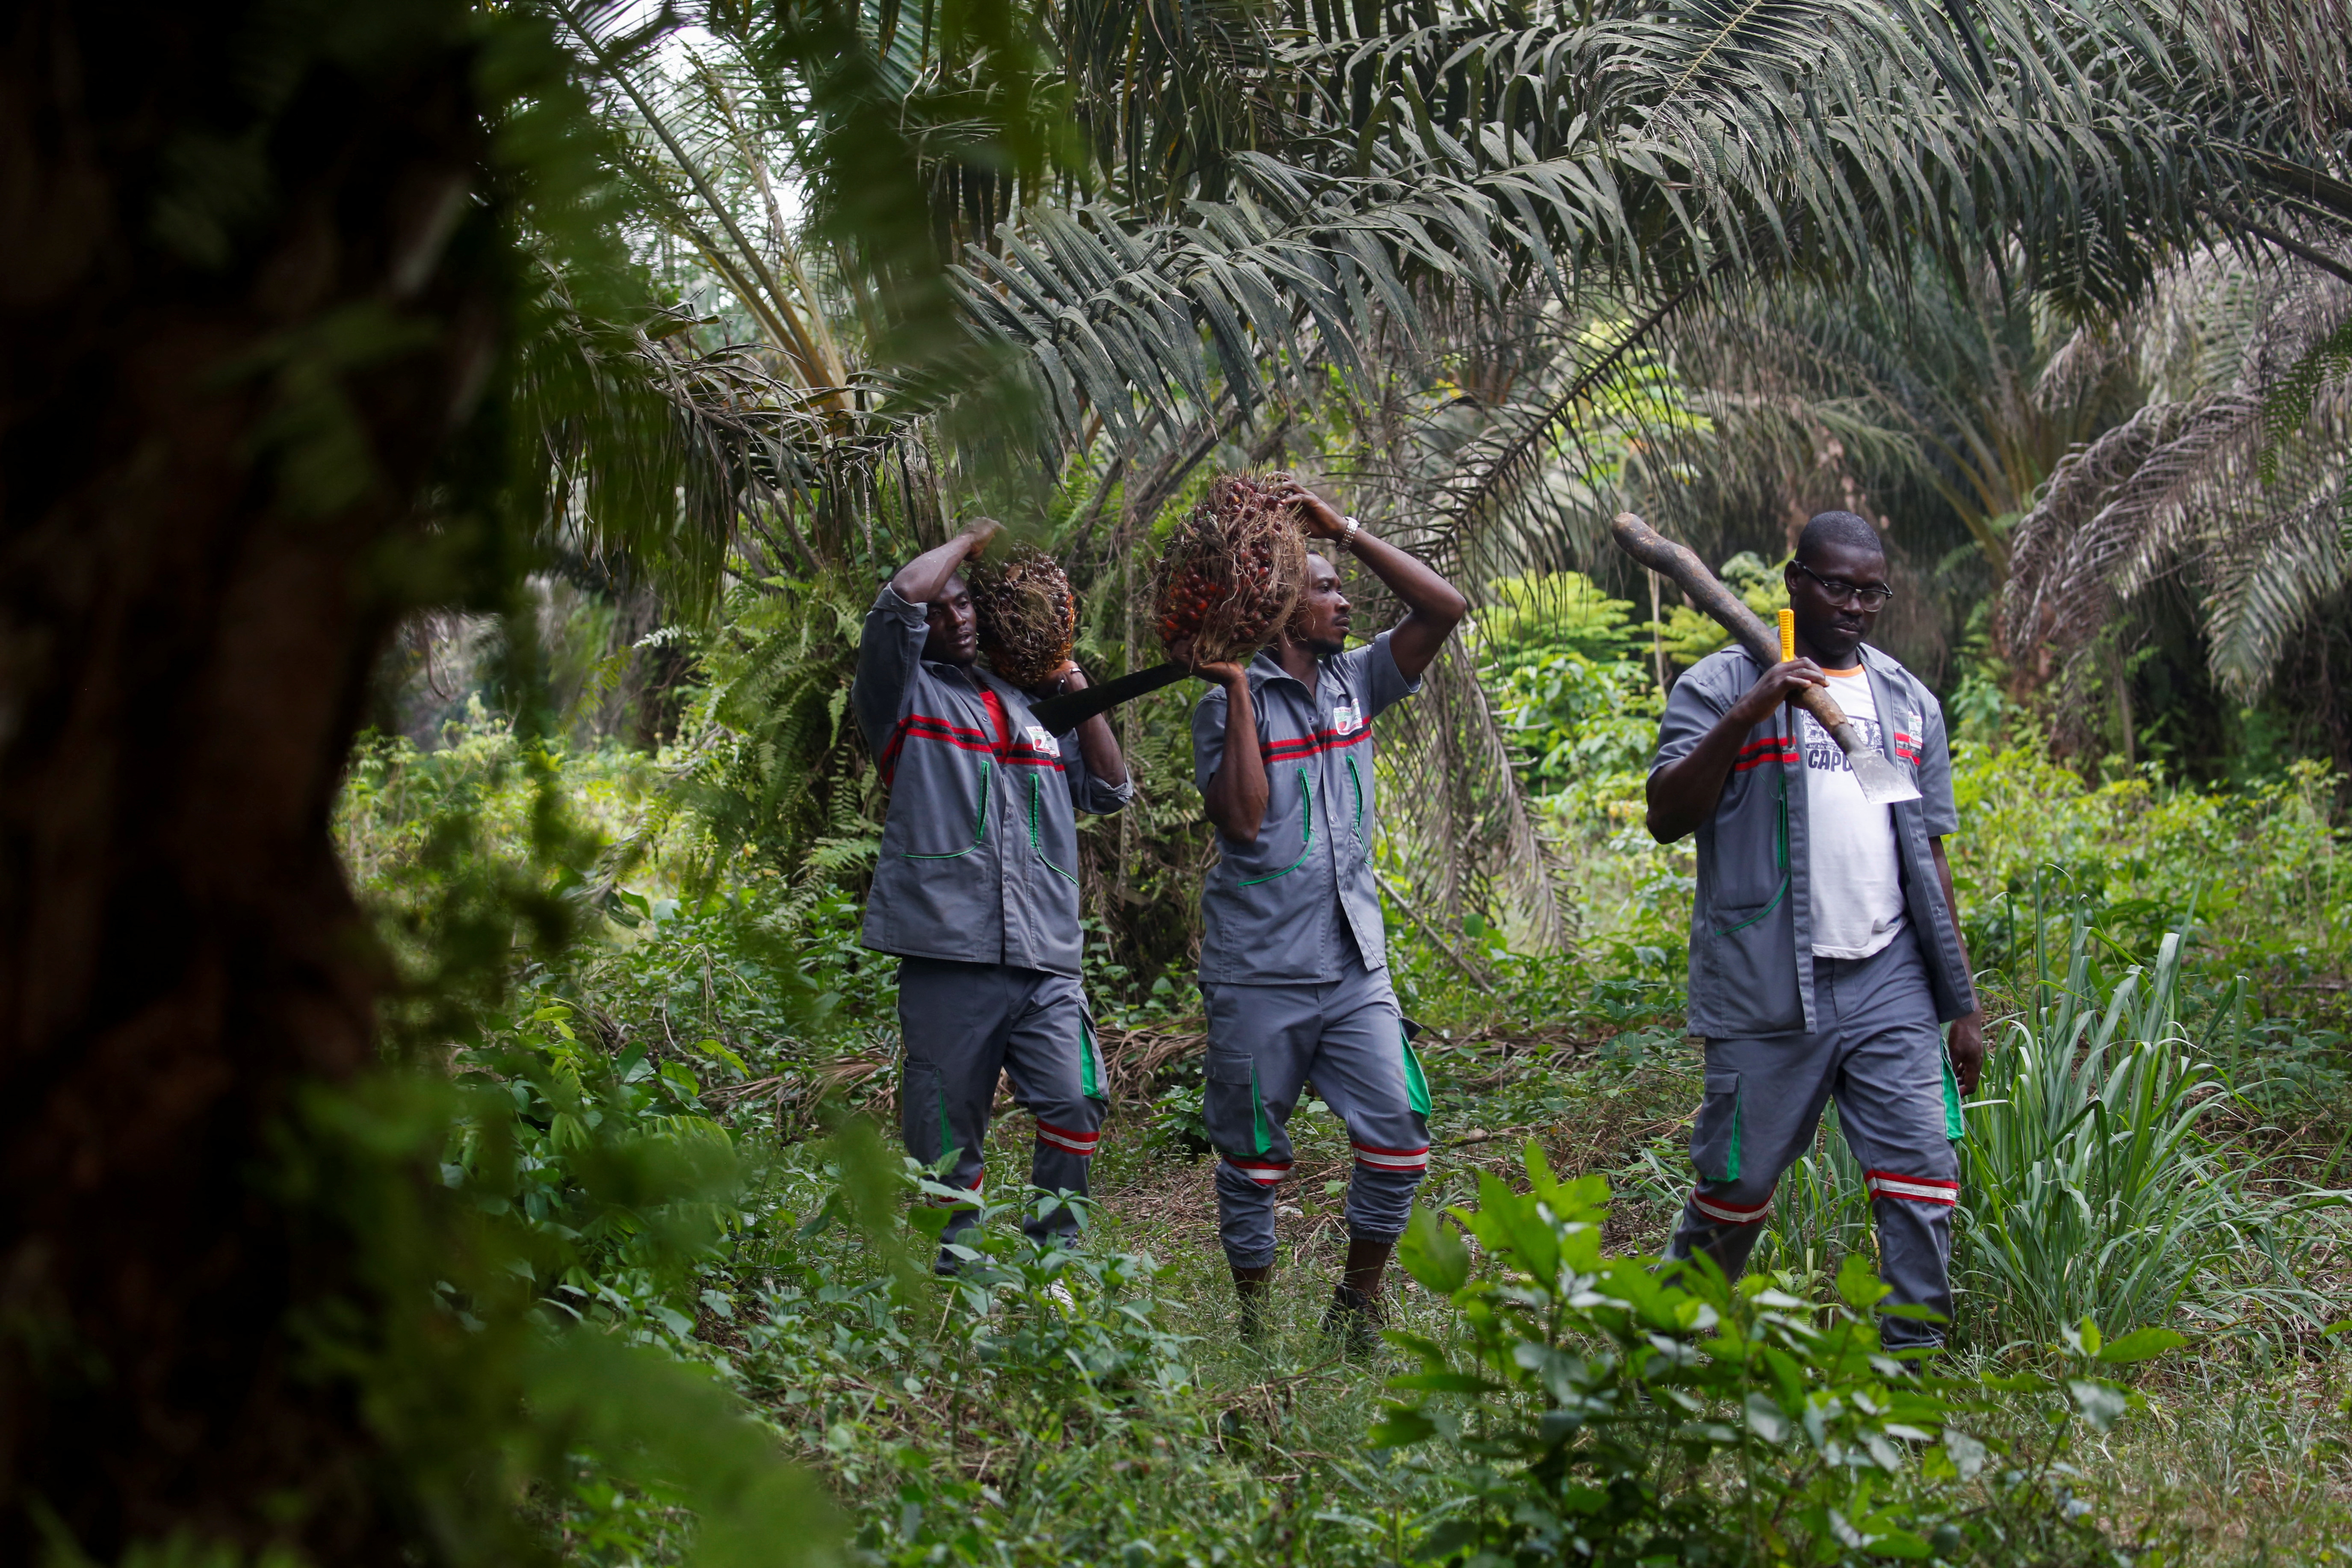 Workers carry palm oil fruit bunches at Agrivar's palm oil plantation in Adiake